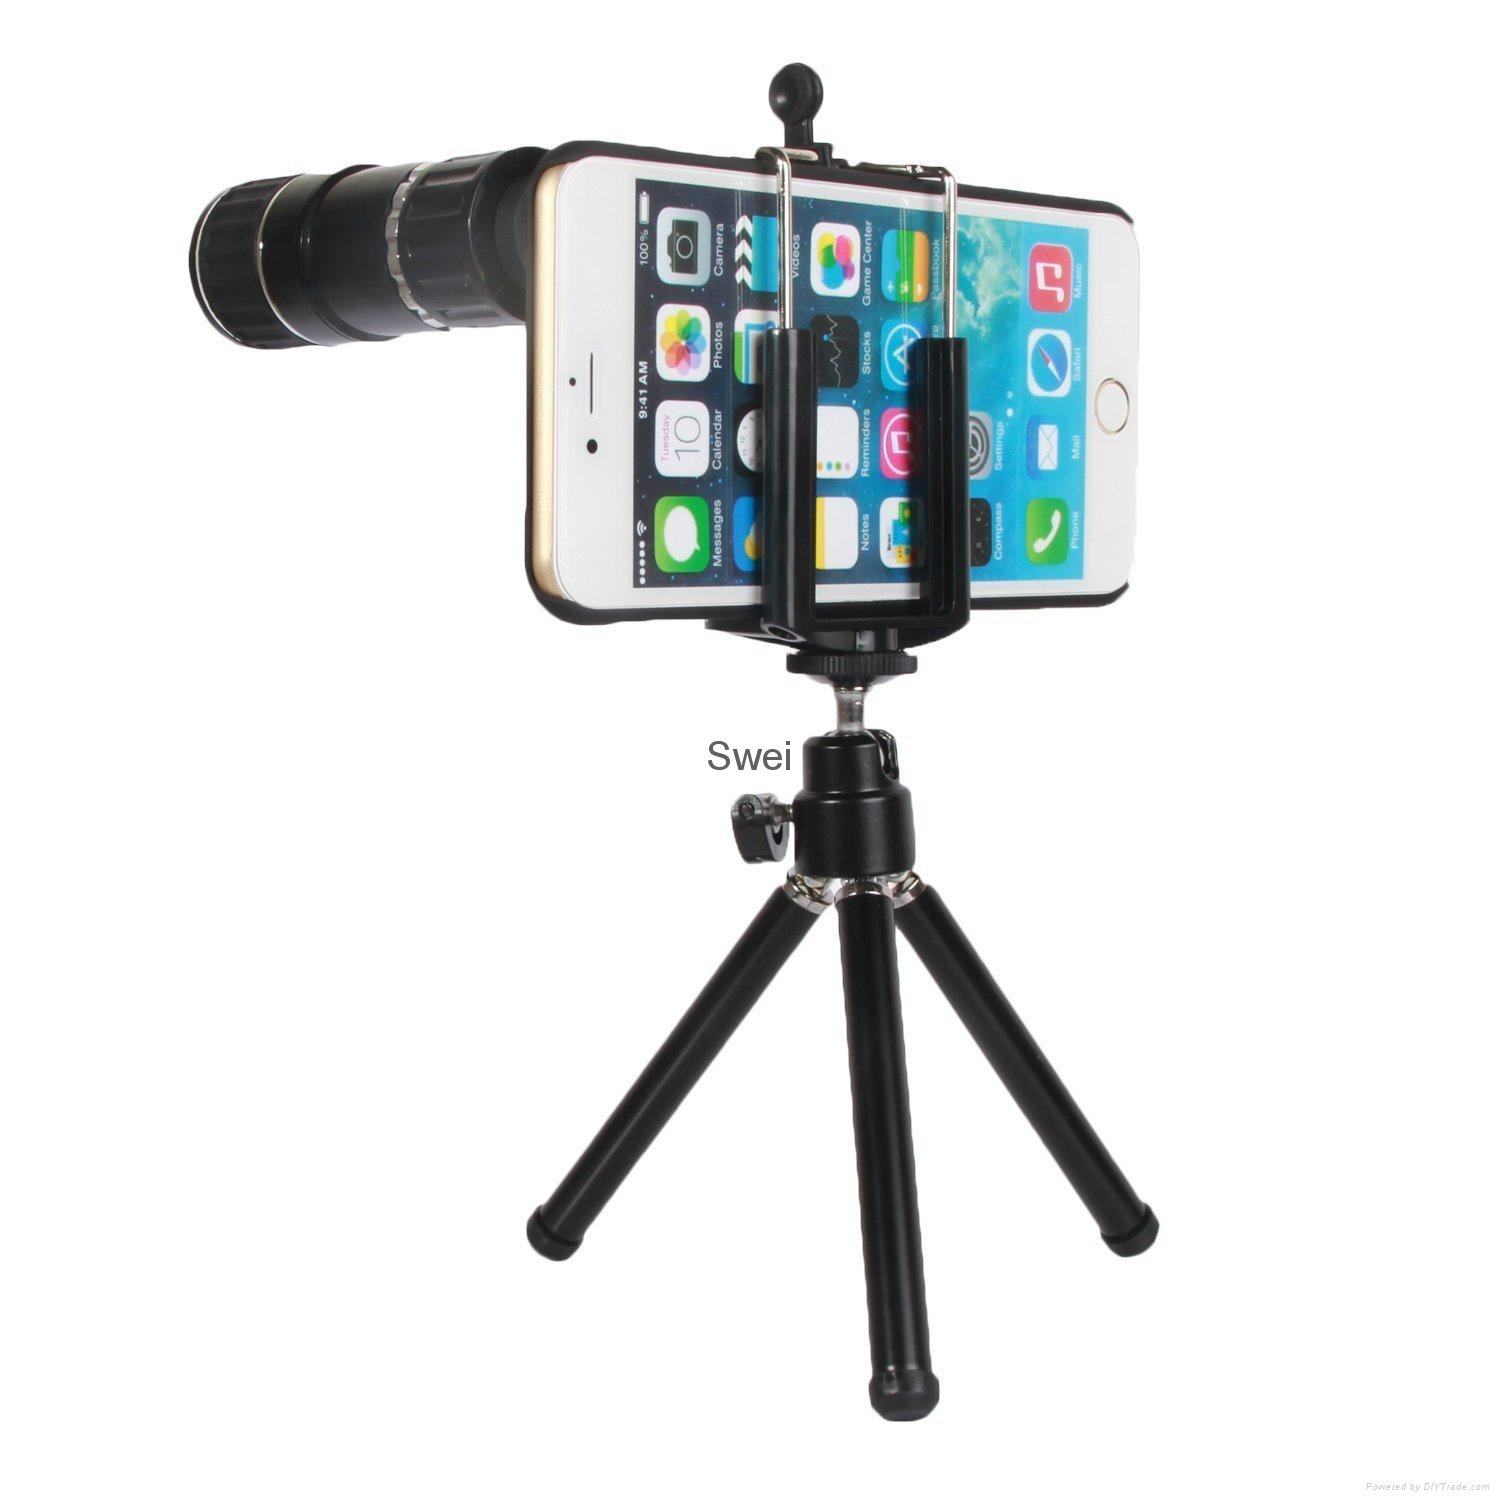 12X Magnifcation Telescope Lens W/ Micro Manual Focus Adjustment Function For iP 5